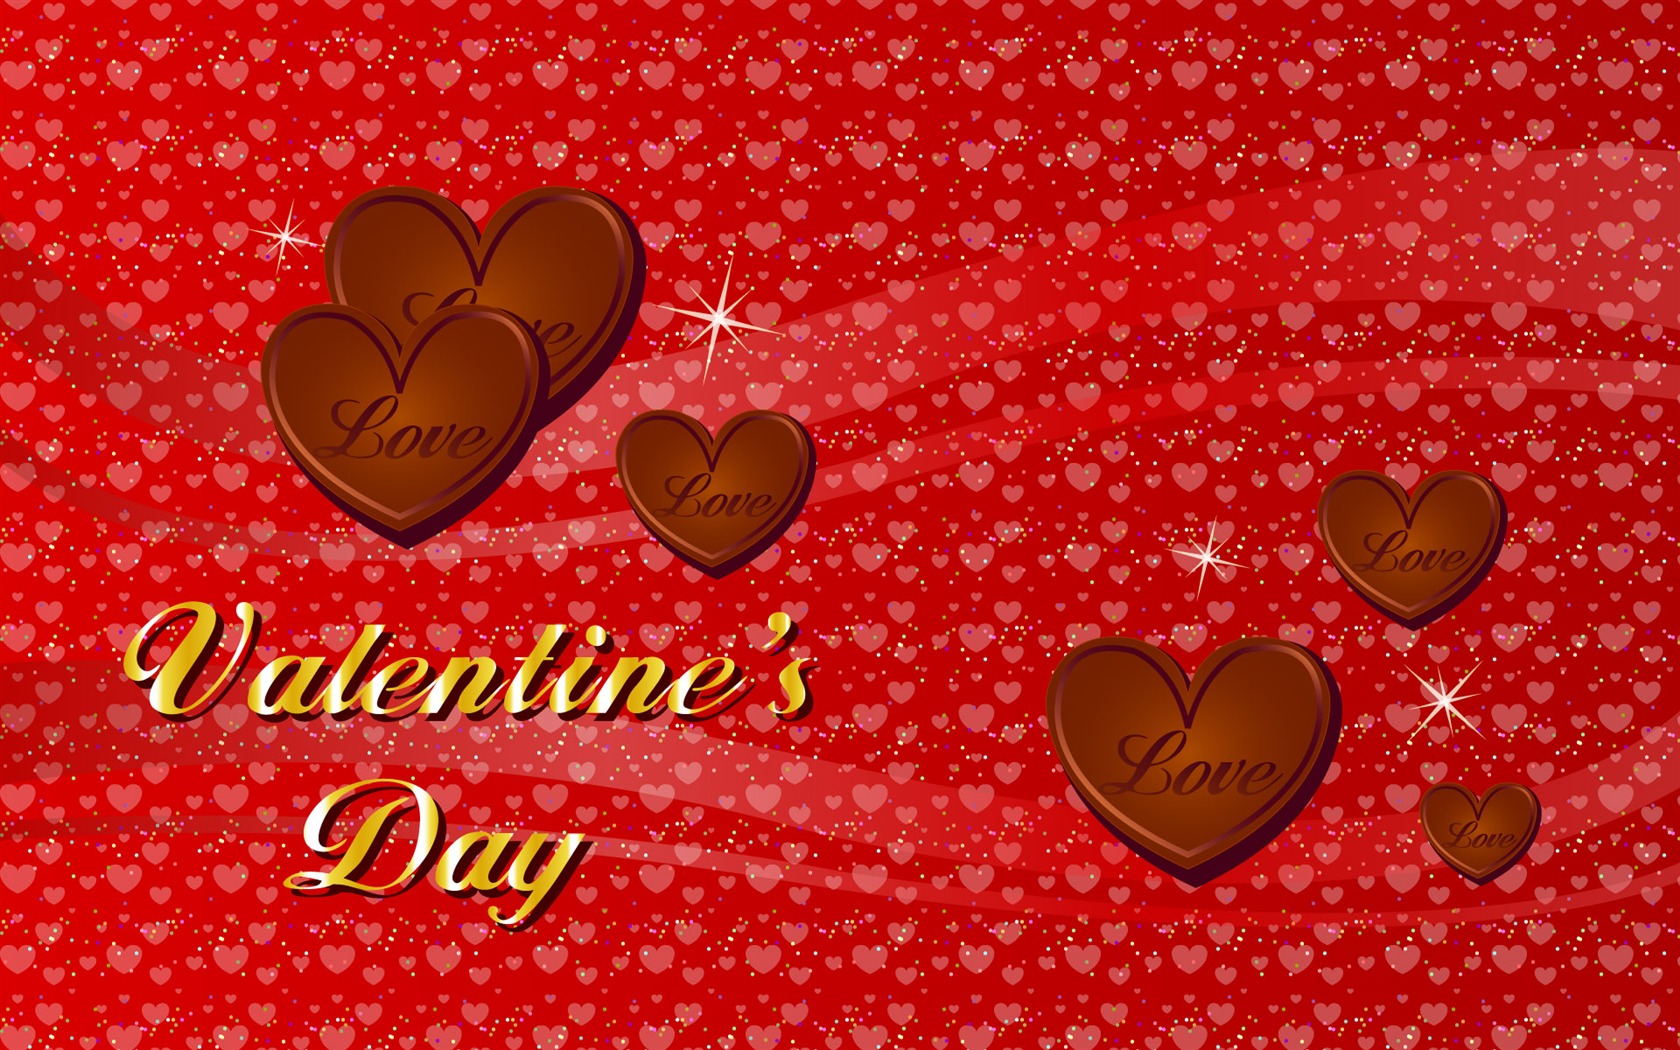 Valentine's Day Theme Wallpapers (1) #14 - 1680x1050